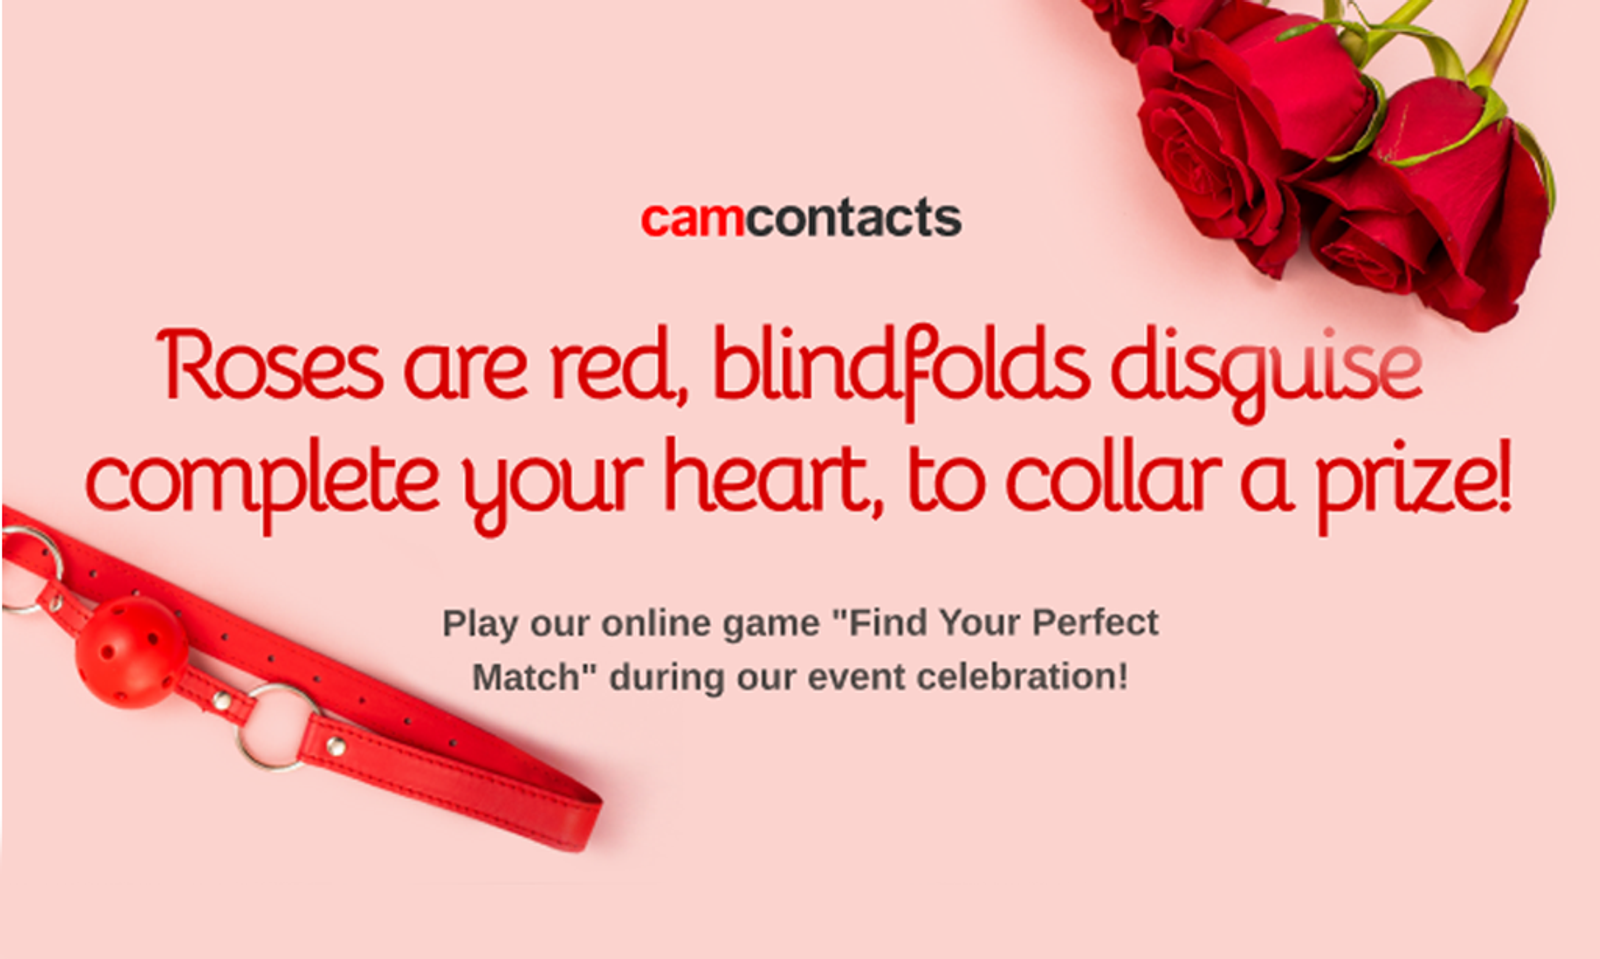 CamContacts' Valentine's Day Promo Offers $100K in Prizes